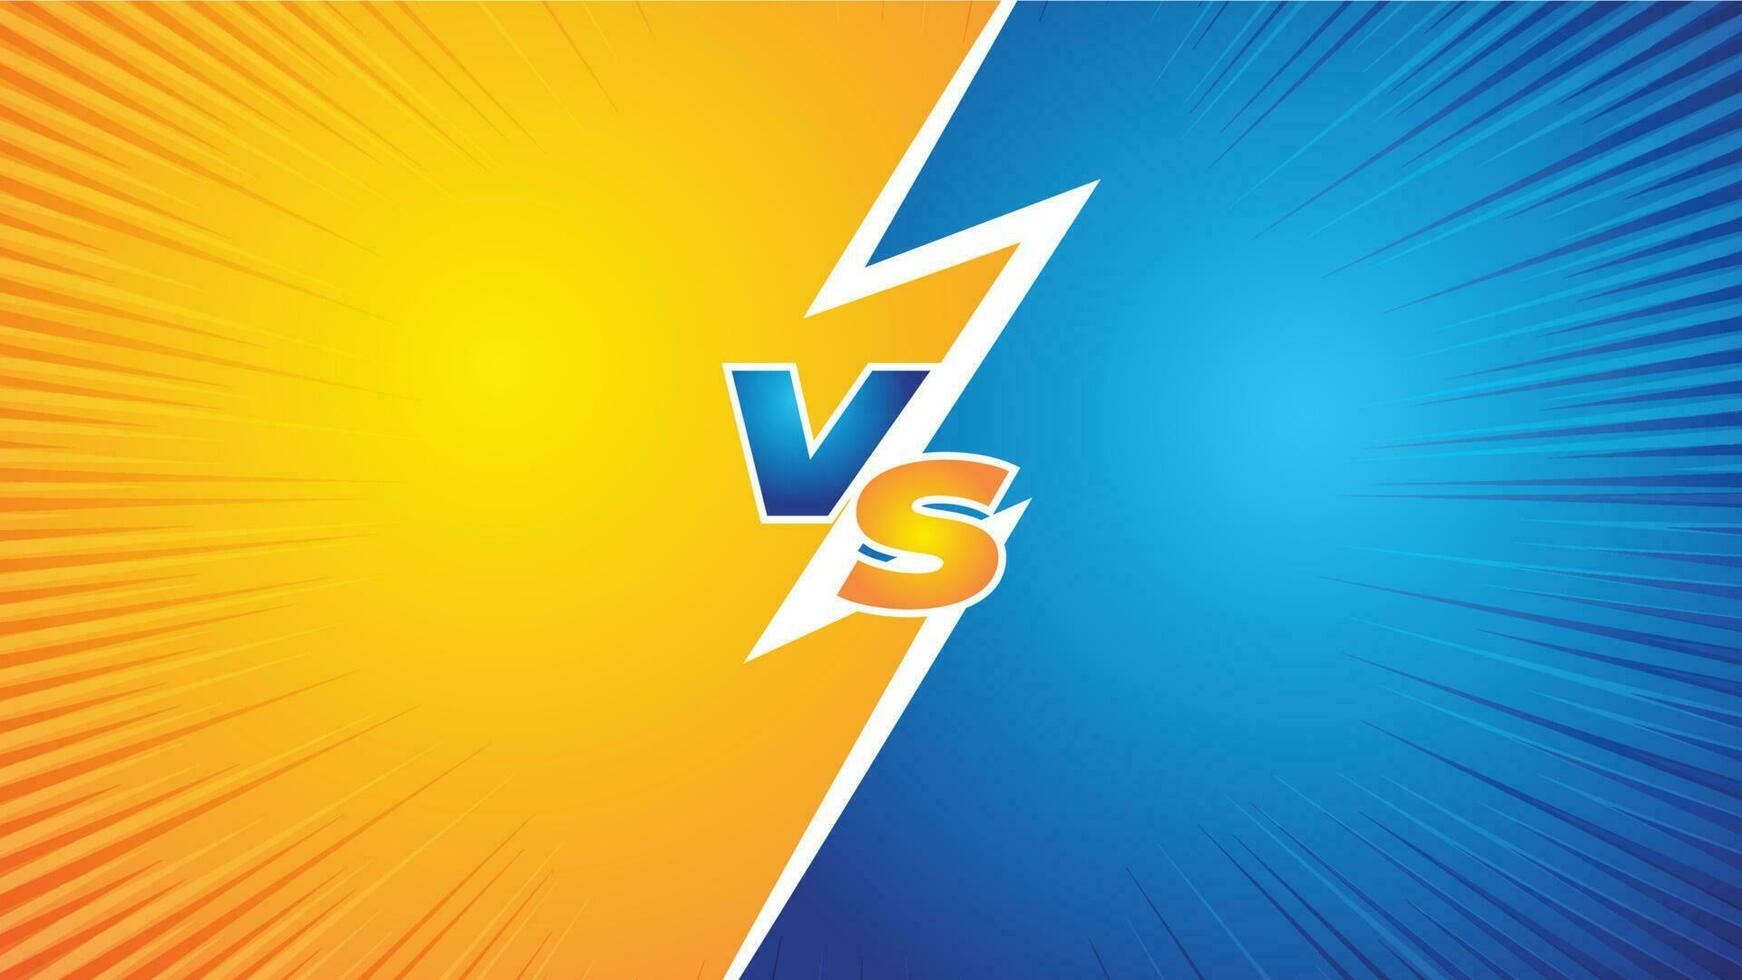 Versus VS background. Fight wallpaper. Comic, pop art style illustration For sports competition, battle, match, game. yellow vs blue pop art background comic style retro style vector